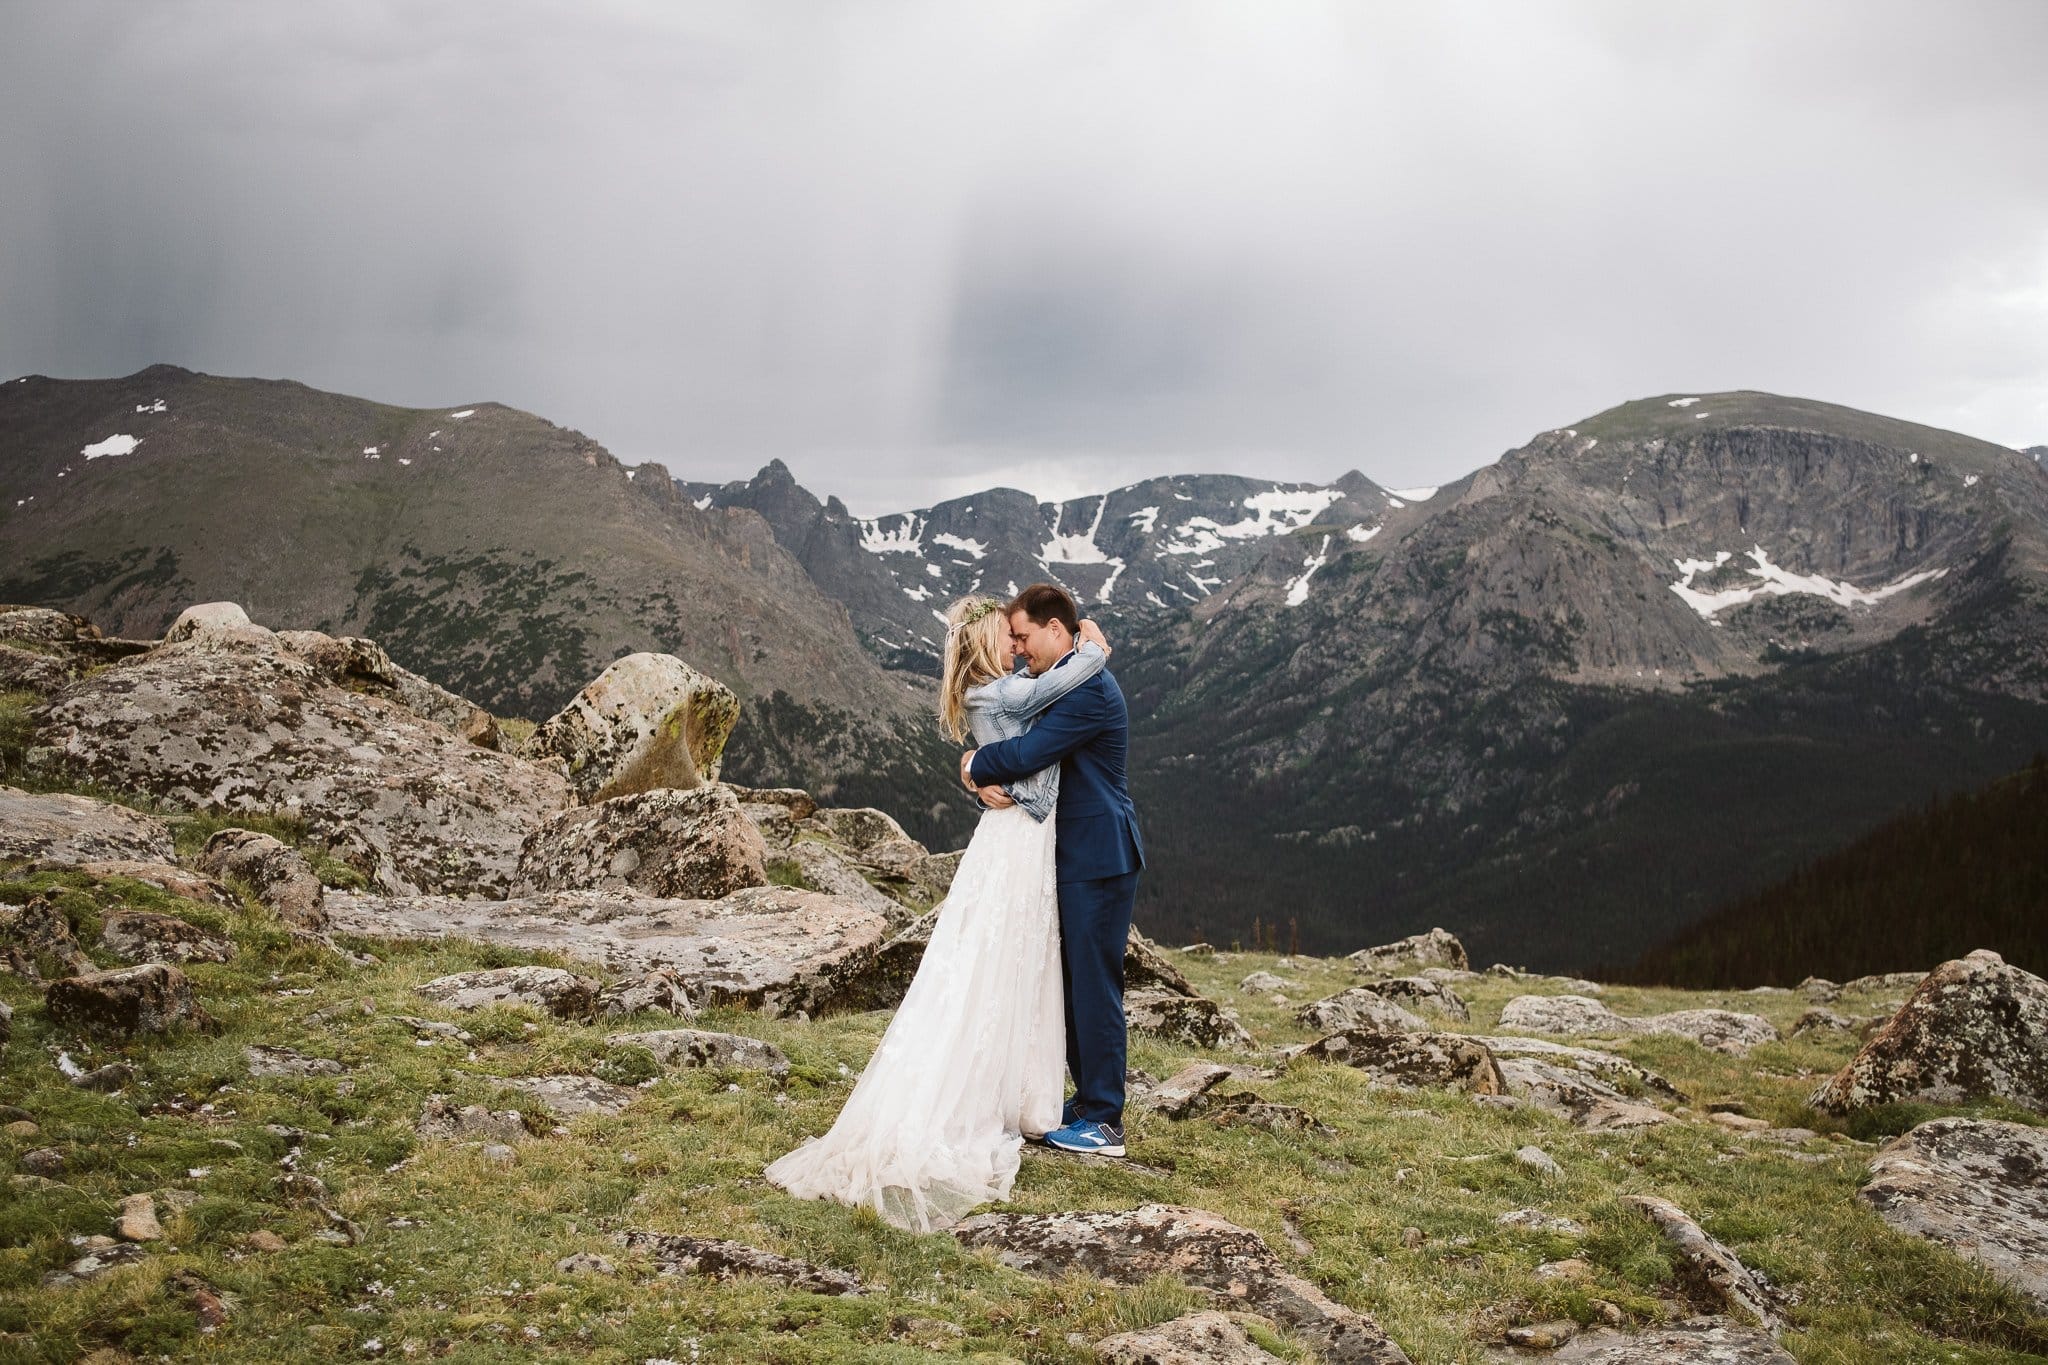 Bride and groom hiking elopement photos at Trail Ridge Road, Rocky Mountain National Park wedding, bride in denim jacket and wedding dress, Colorado elopement photographer